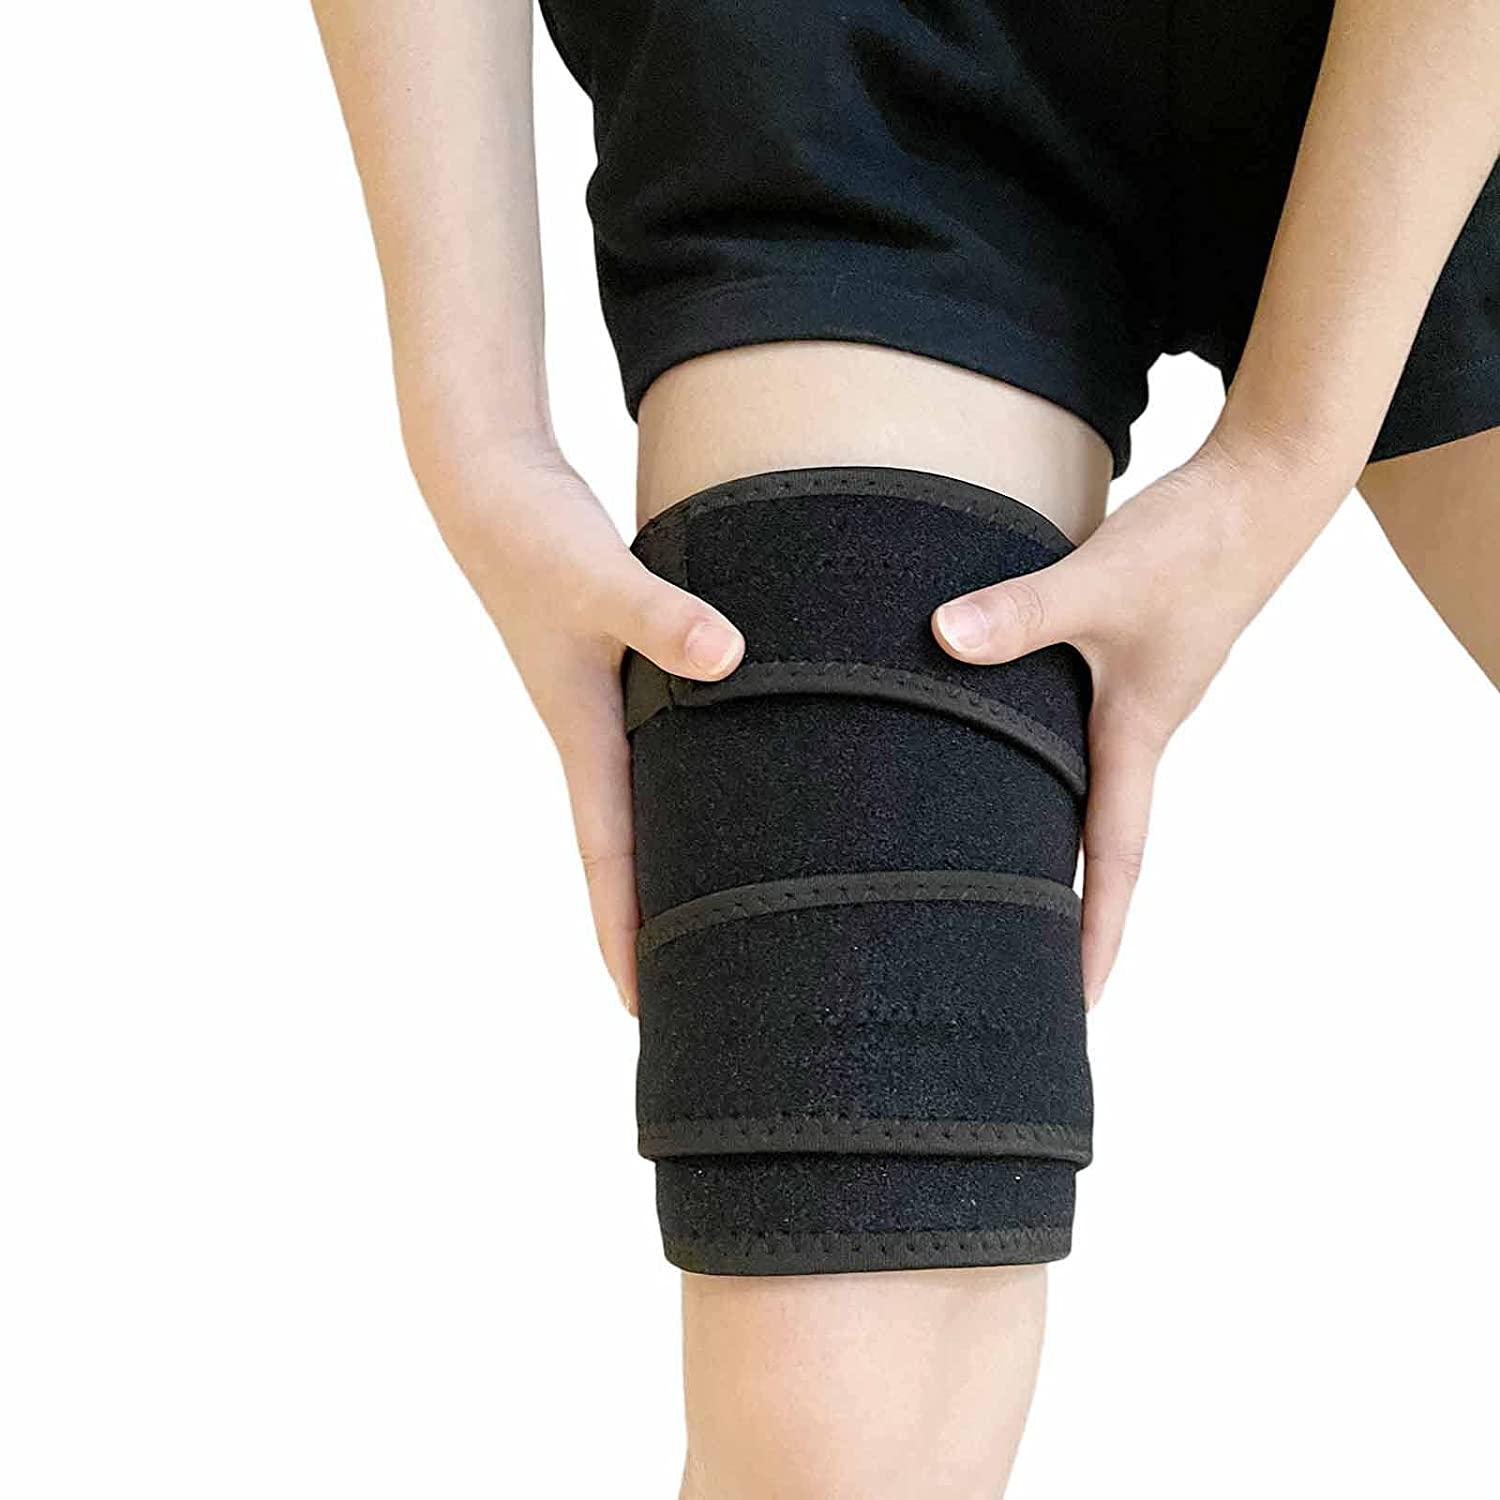 Thigh Compression Sleeves Thigh Support Brace Hamstring Wrap